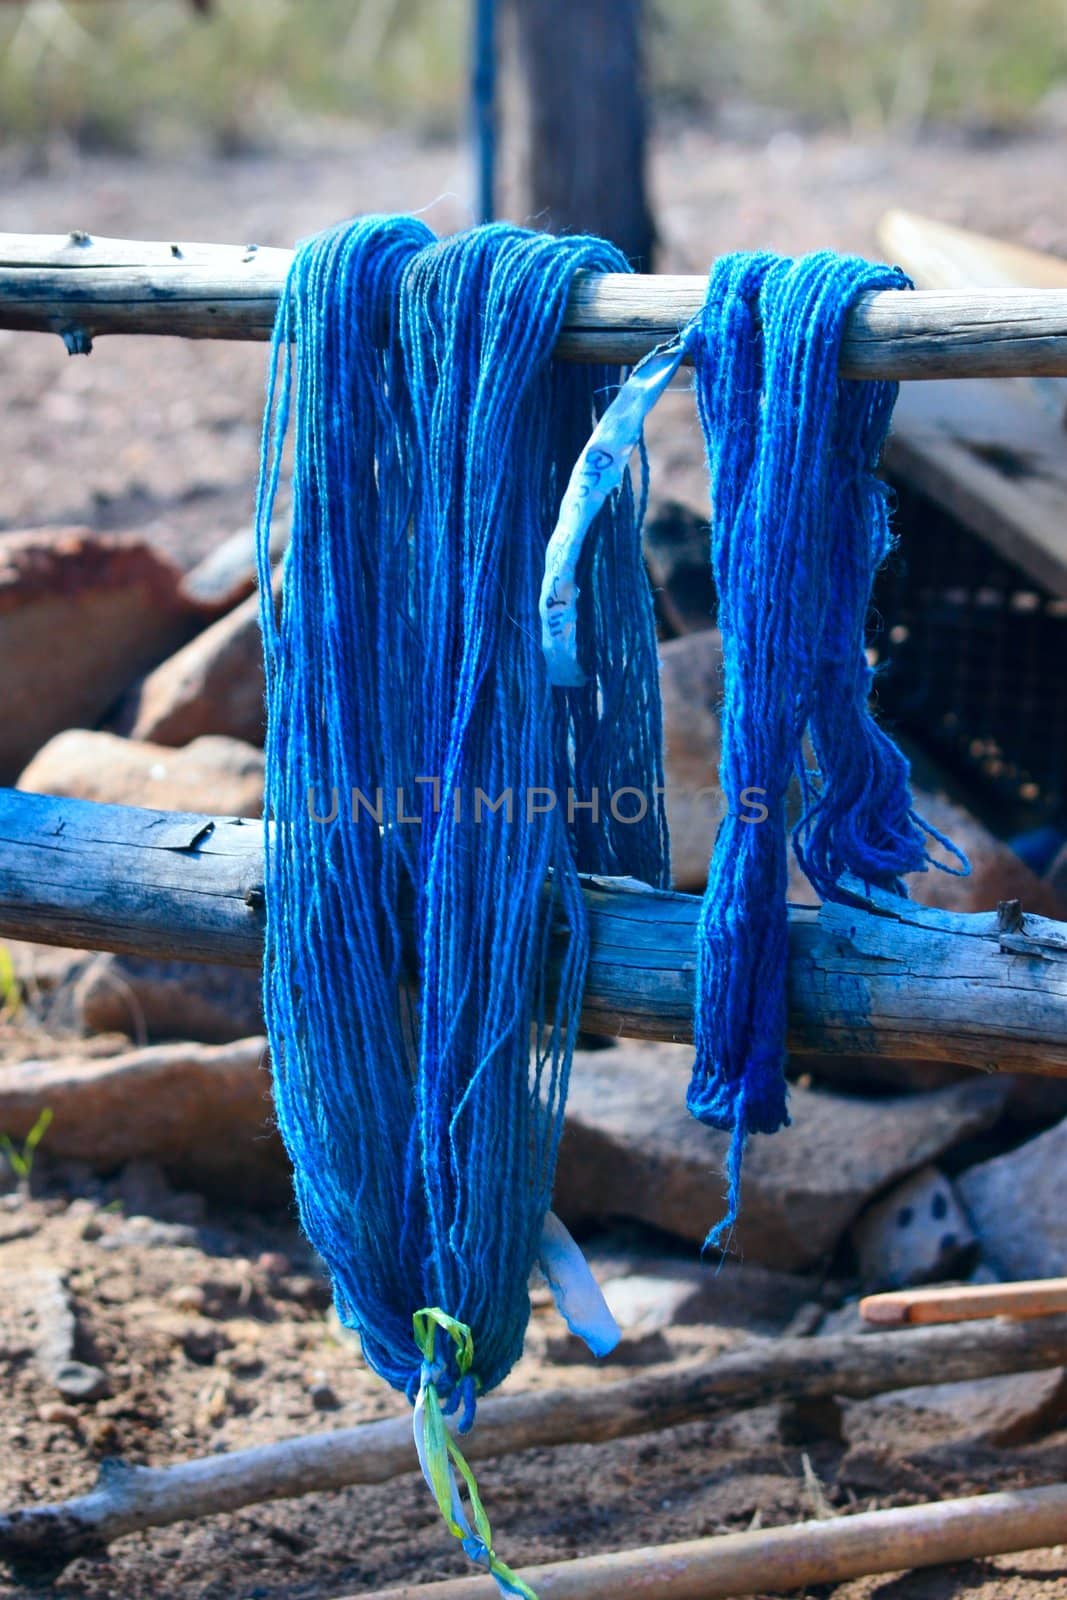 Natural Dyed Yarn by Auldwhispers